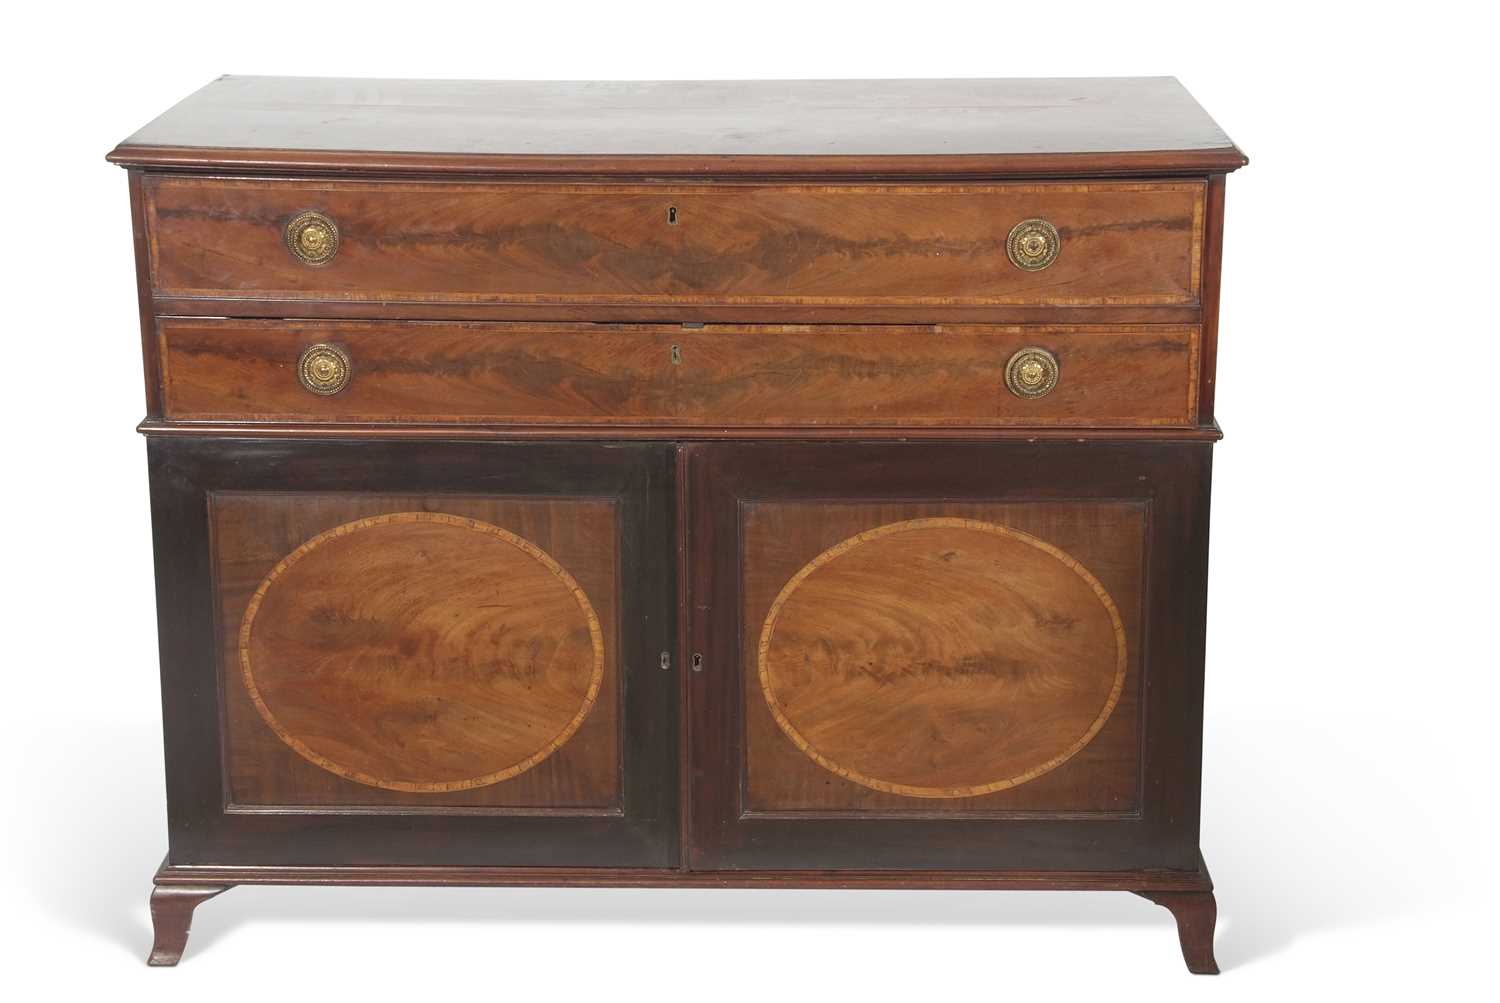 Georgian mahogany gentleman's cabinet with unusual top drawer formed of two sections opening to an